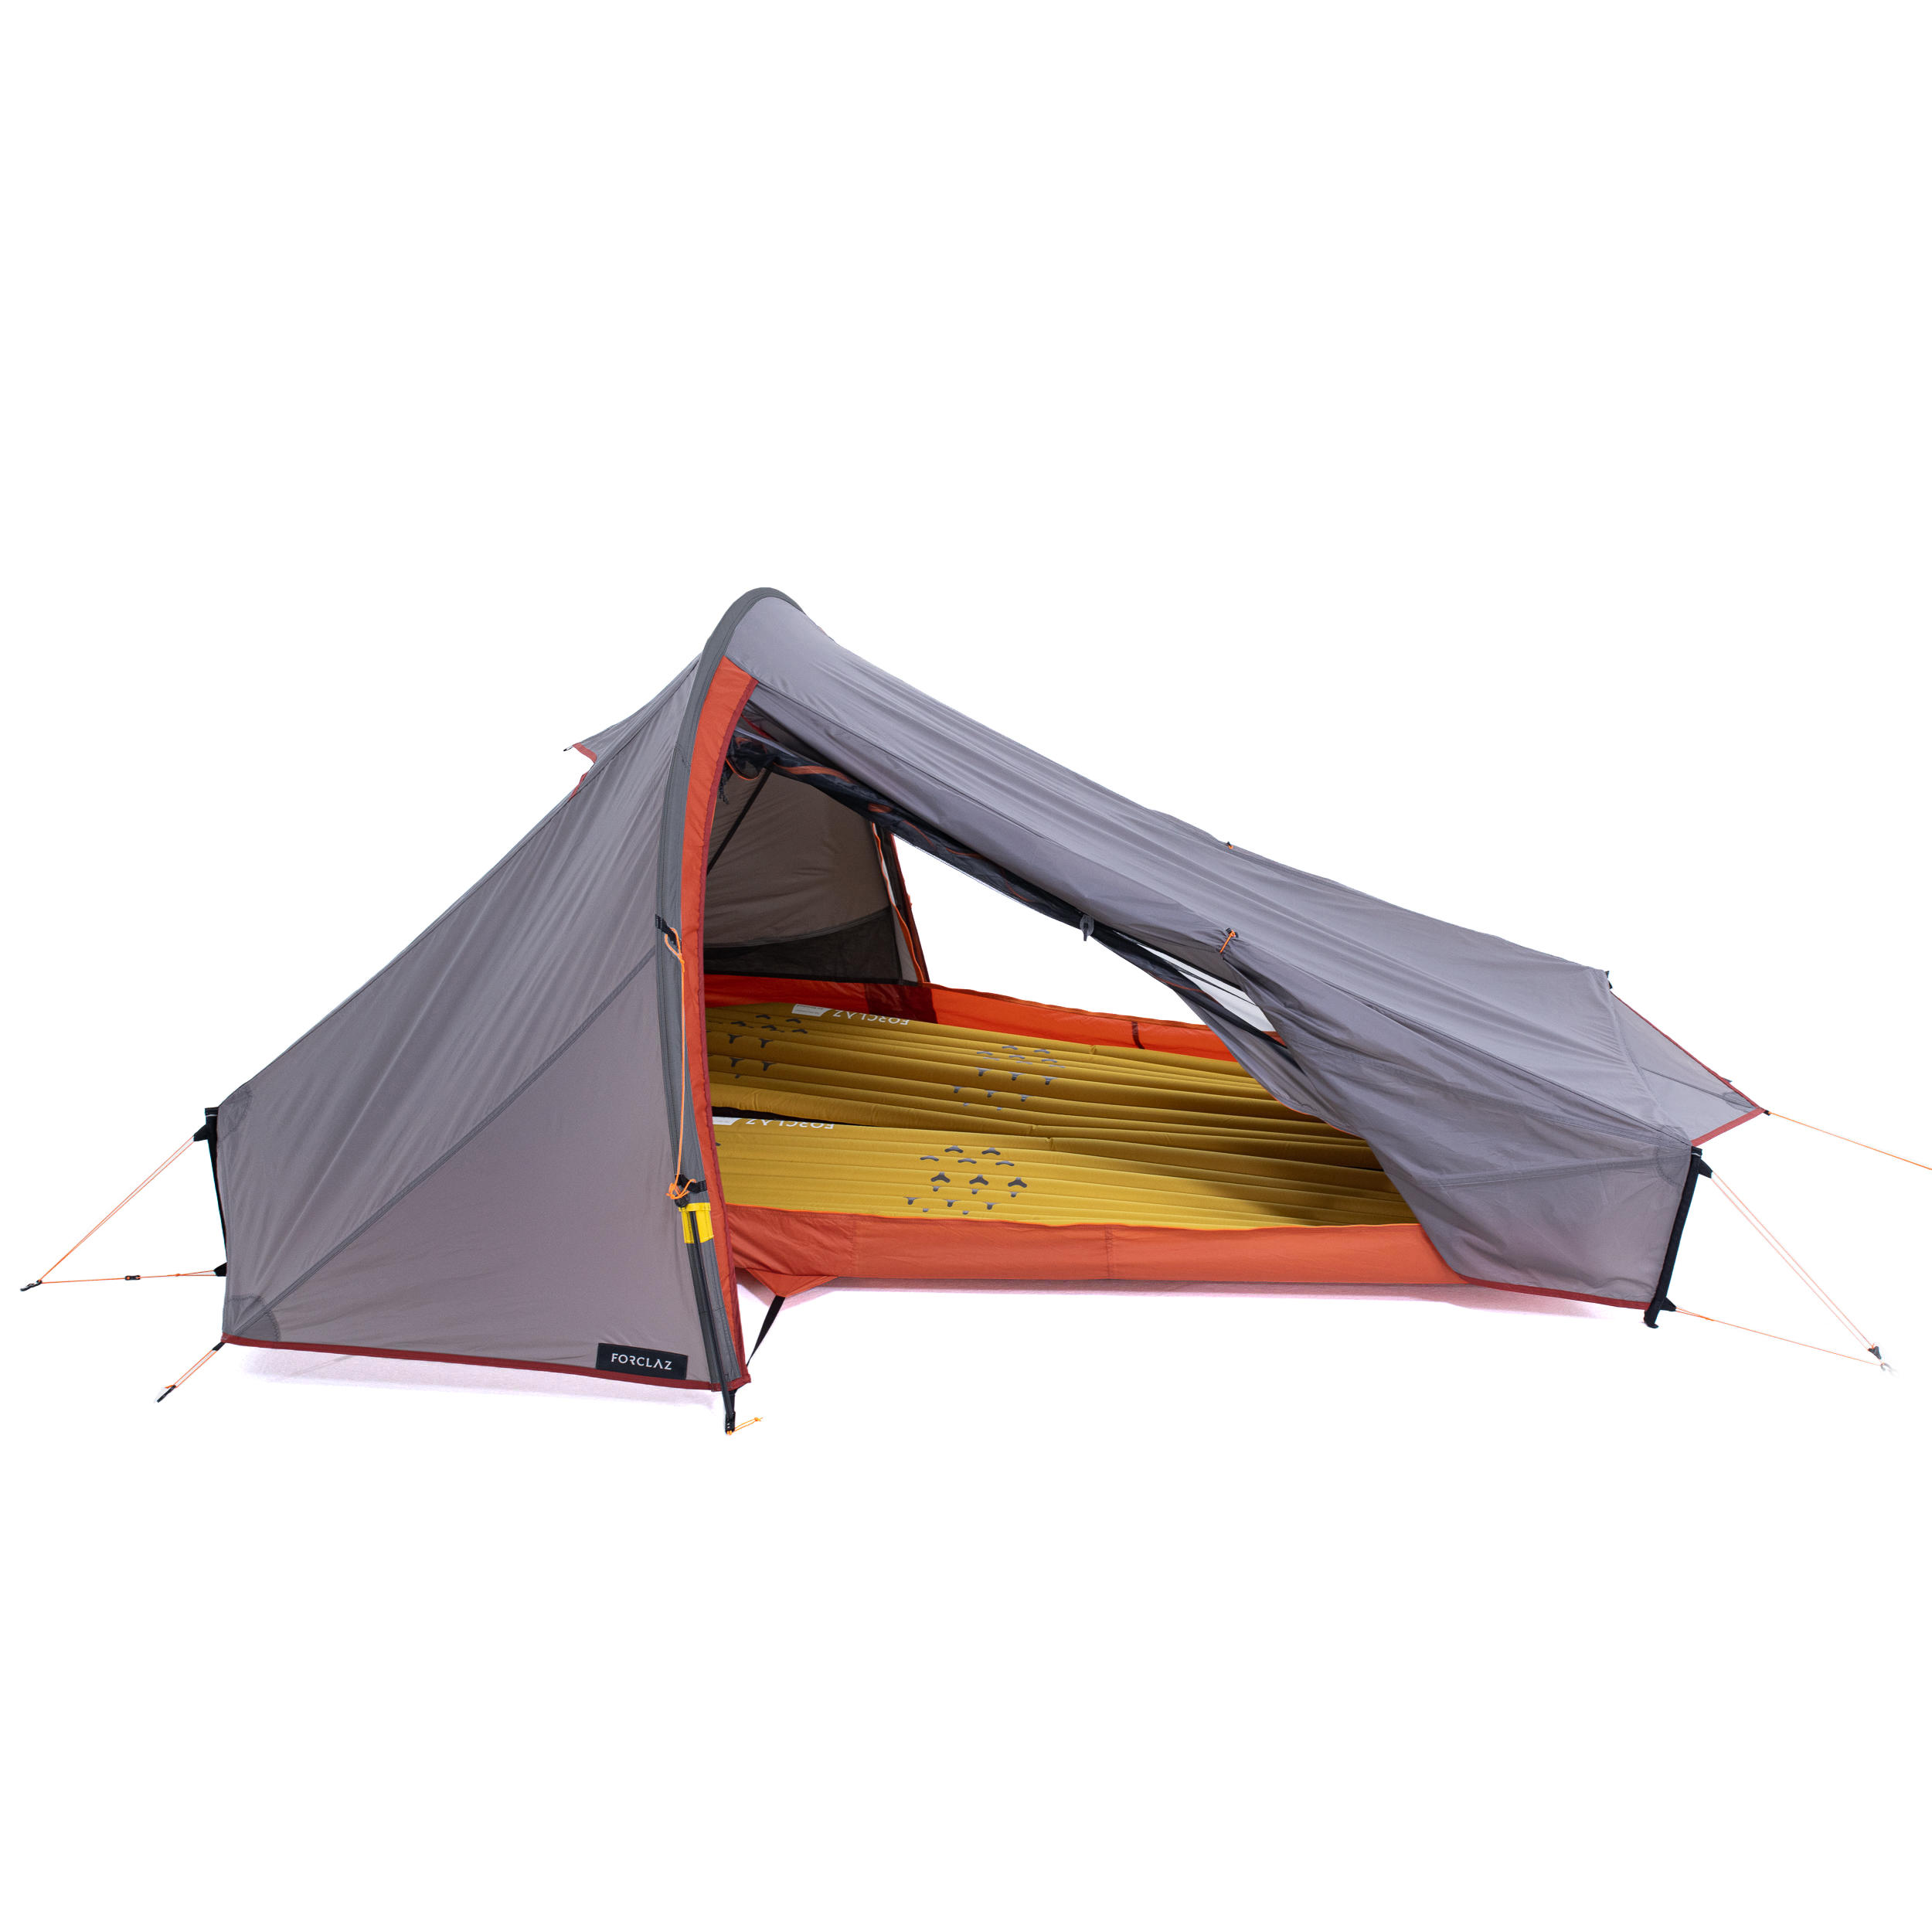 Backpacking Tents | Wild Camping Tents 